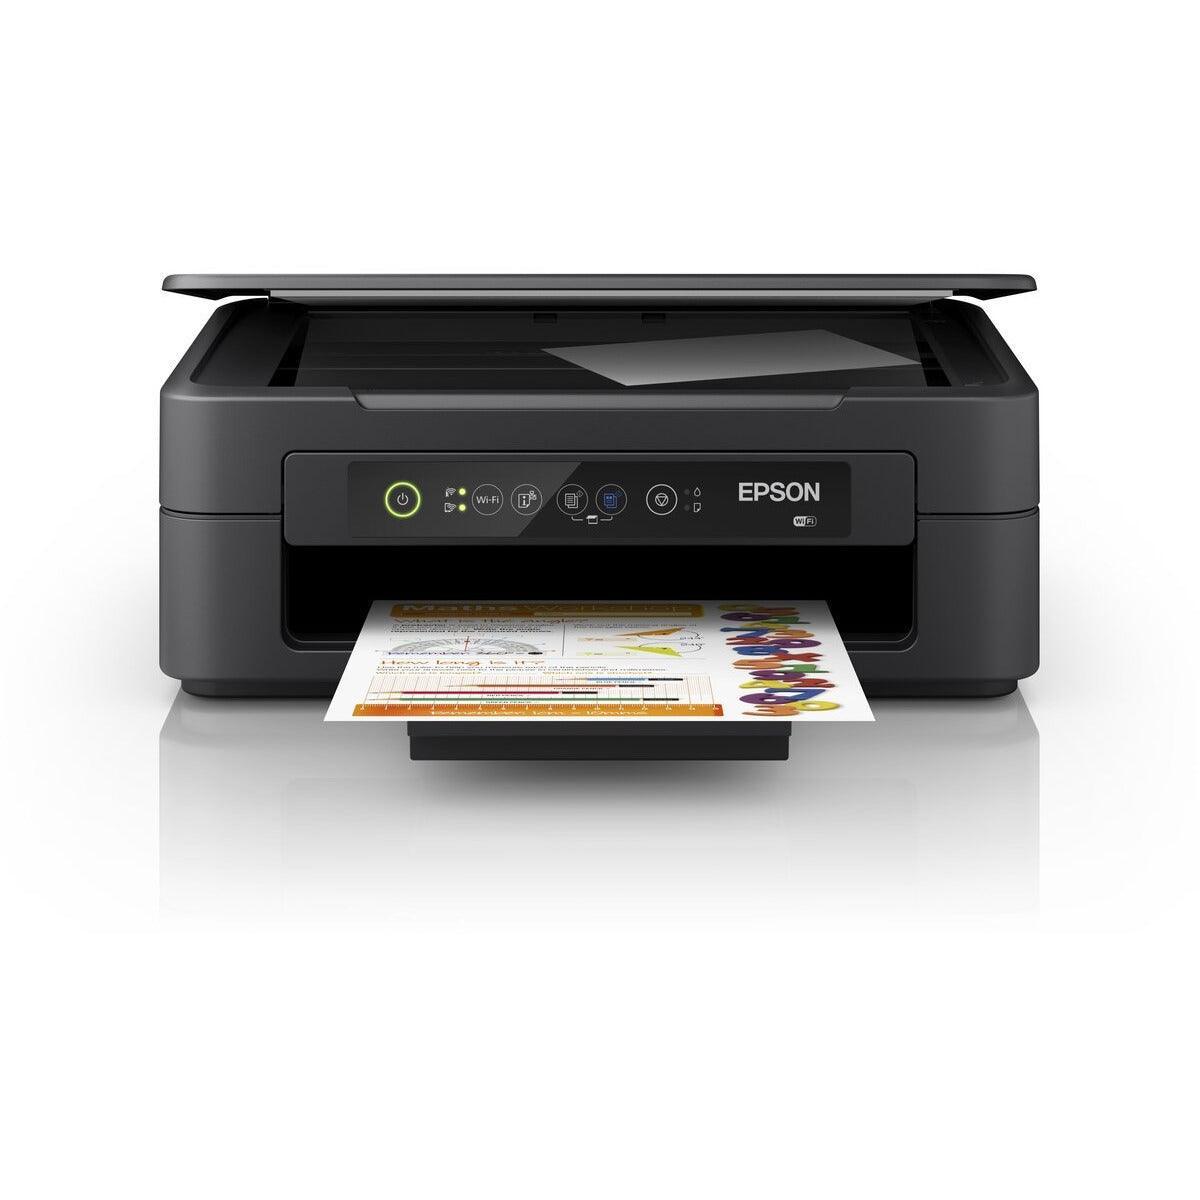 Epson Expression Home XP - 2100 Inkjet Printer - Black | C11CH02401 from DID Electrical - guaranteed Irish, guaranteed quality service. (6977432518844)